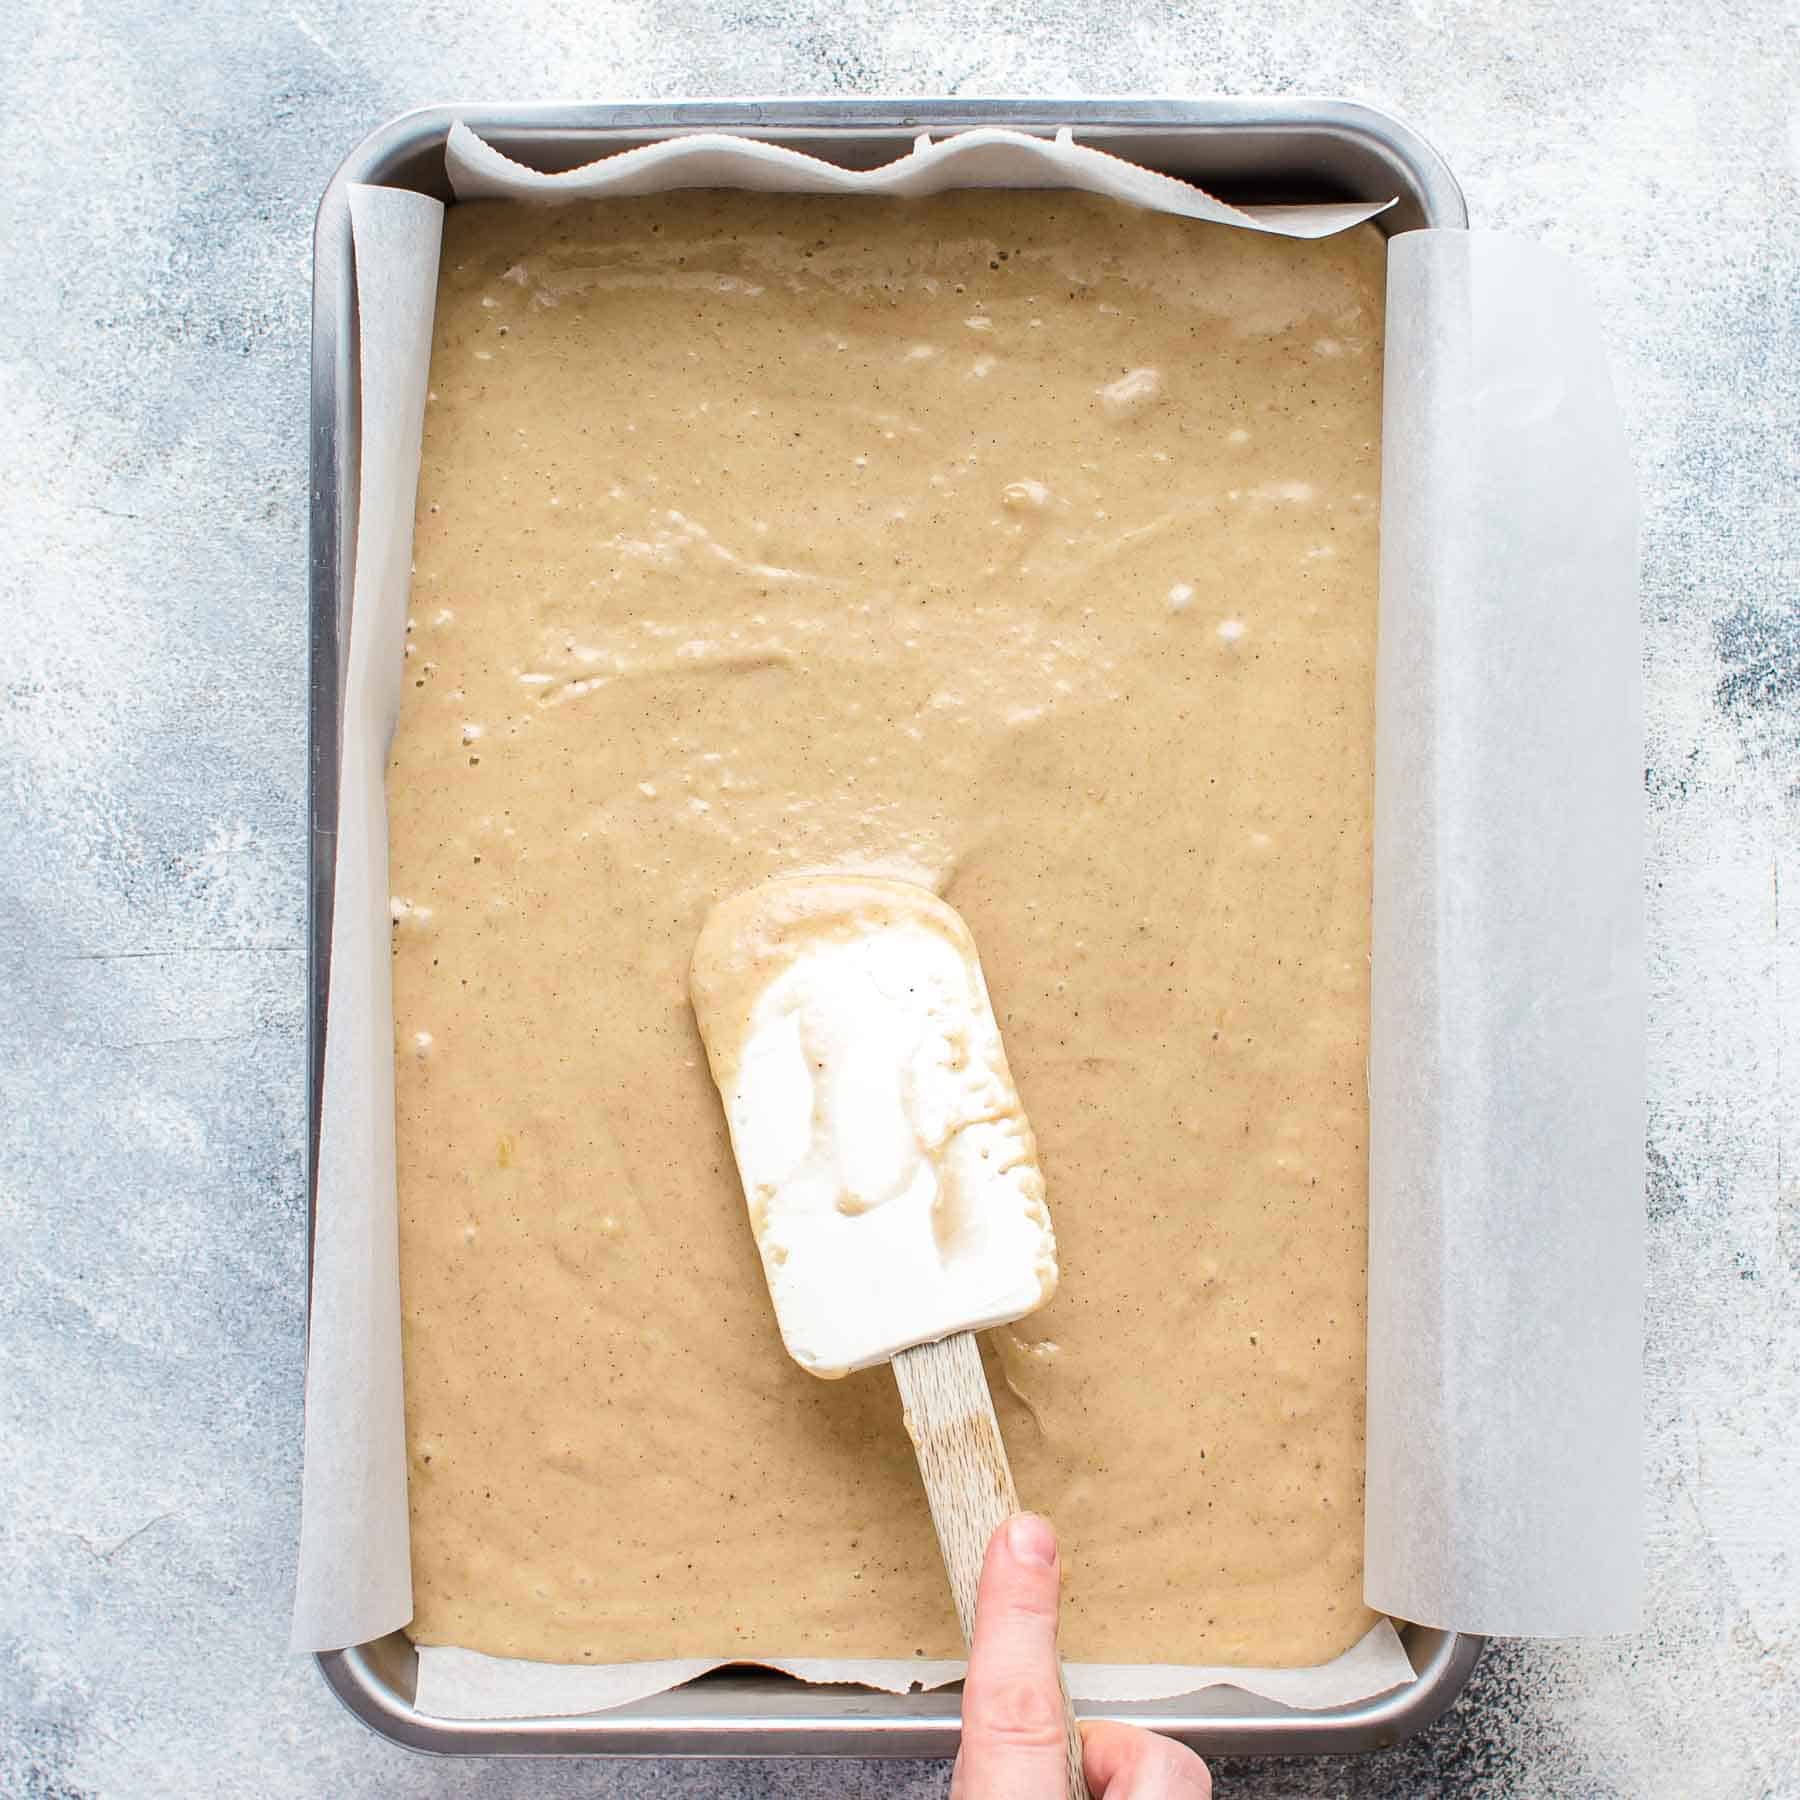 leveling banana cake batter in the baking pan with a spatula